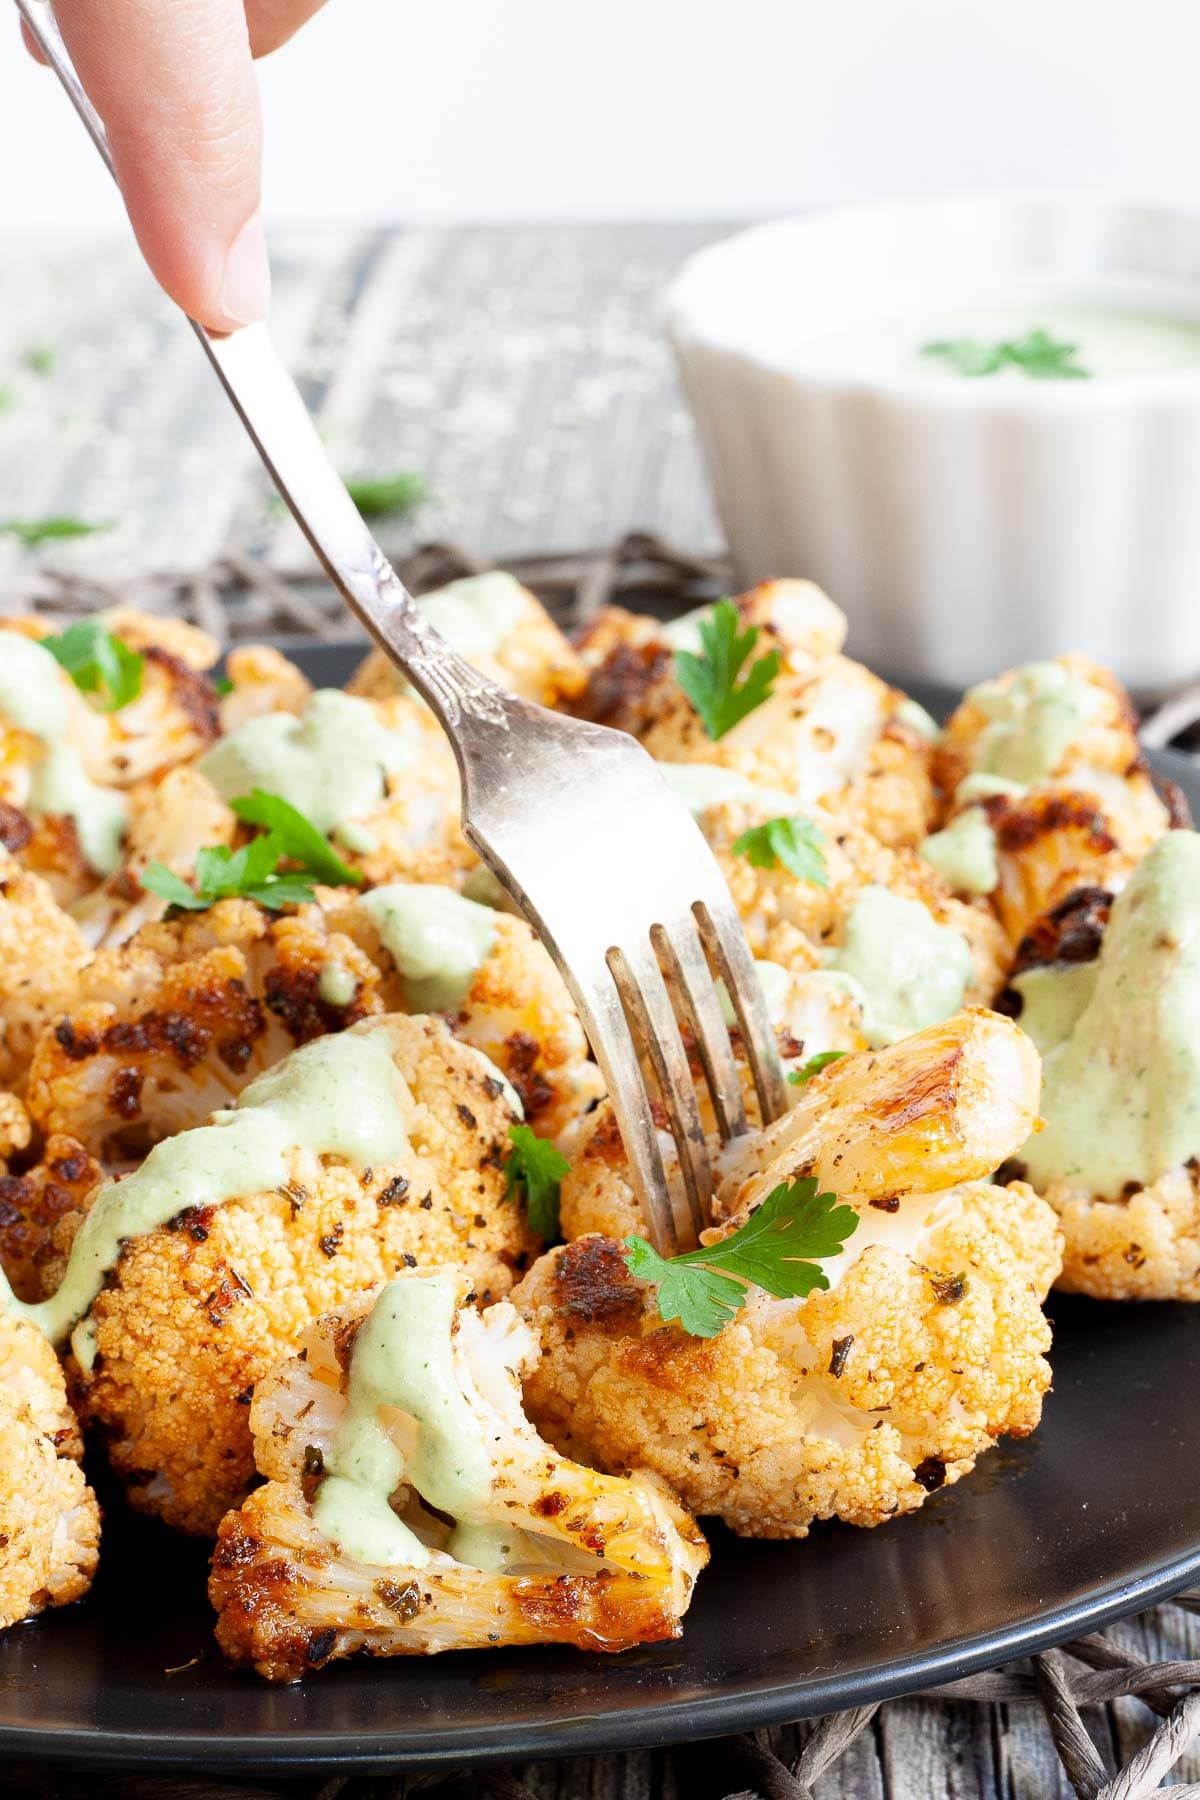 Black plate full of roasted cauliflower florets drizzled with a light green creamy sauce and sprinkled with fresh parsley. A hand is holding a fork and taking one floret.